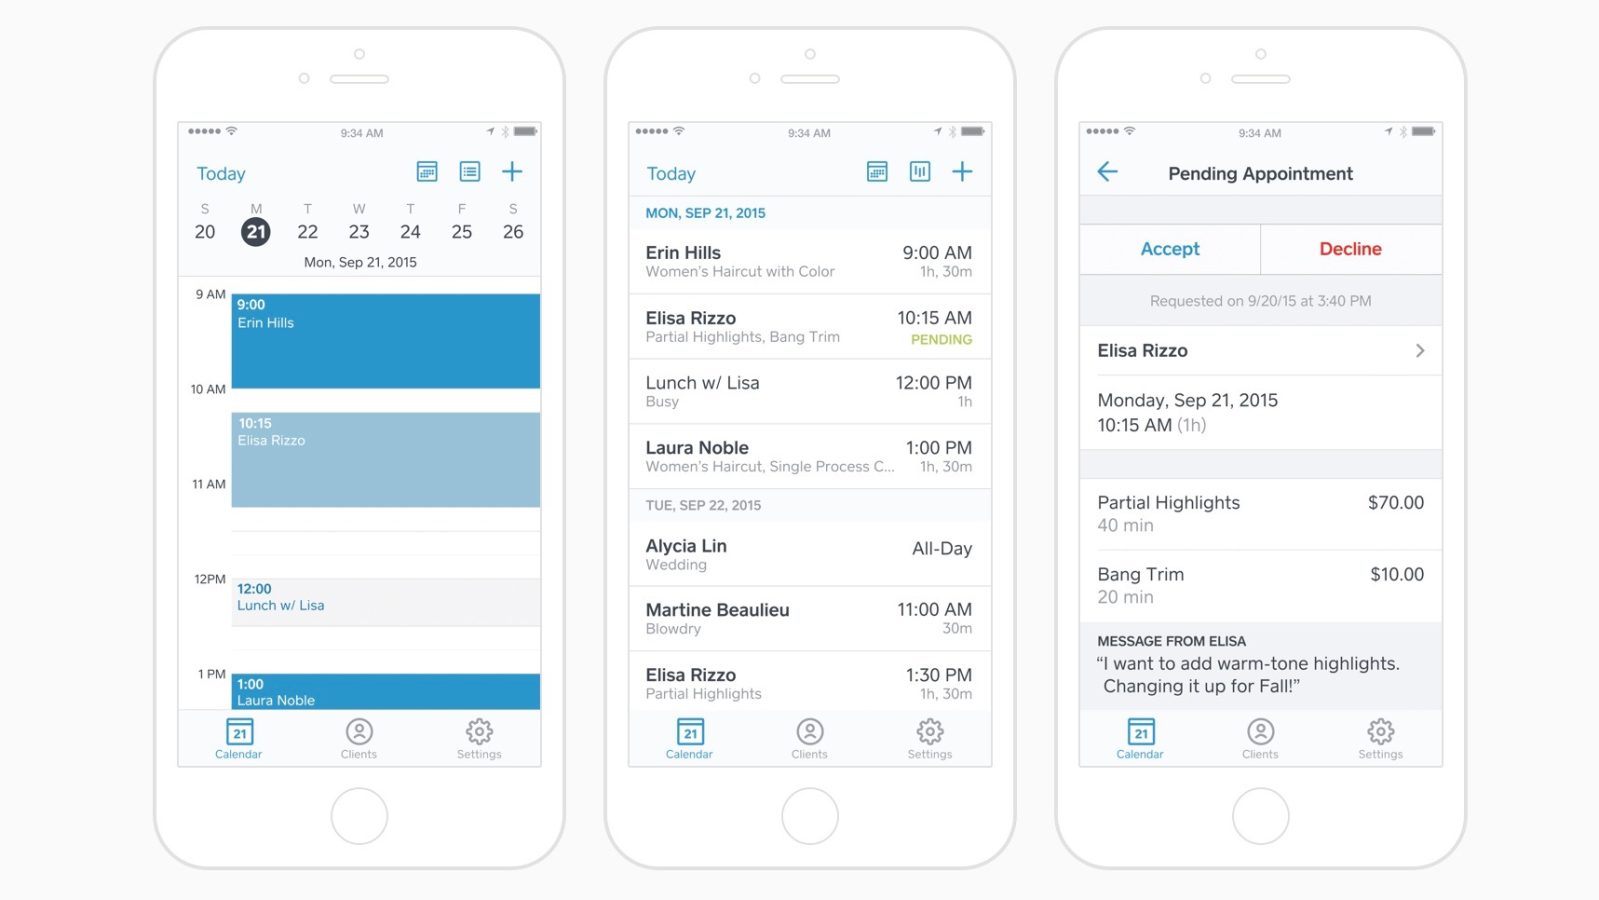 Square Debuts New Schedule Booking Appointments App For IPhone 9to5Mac